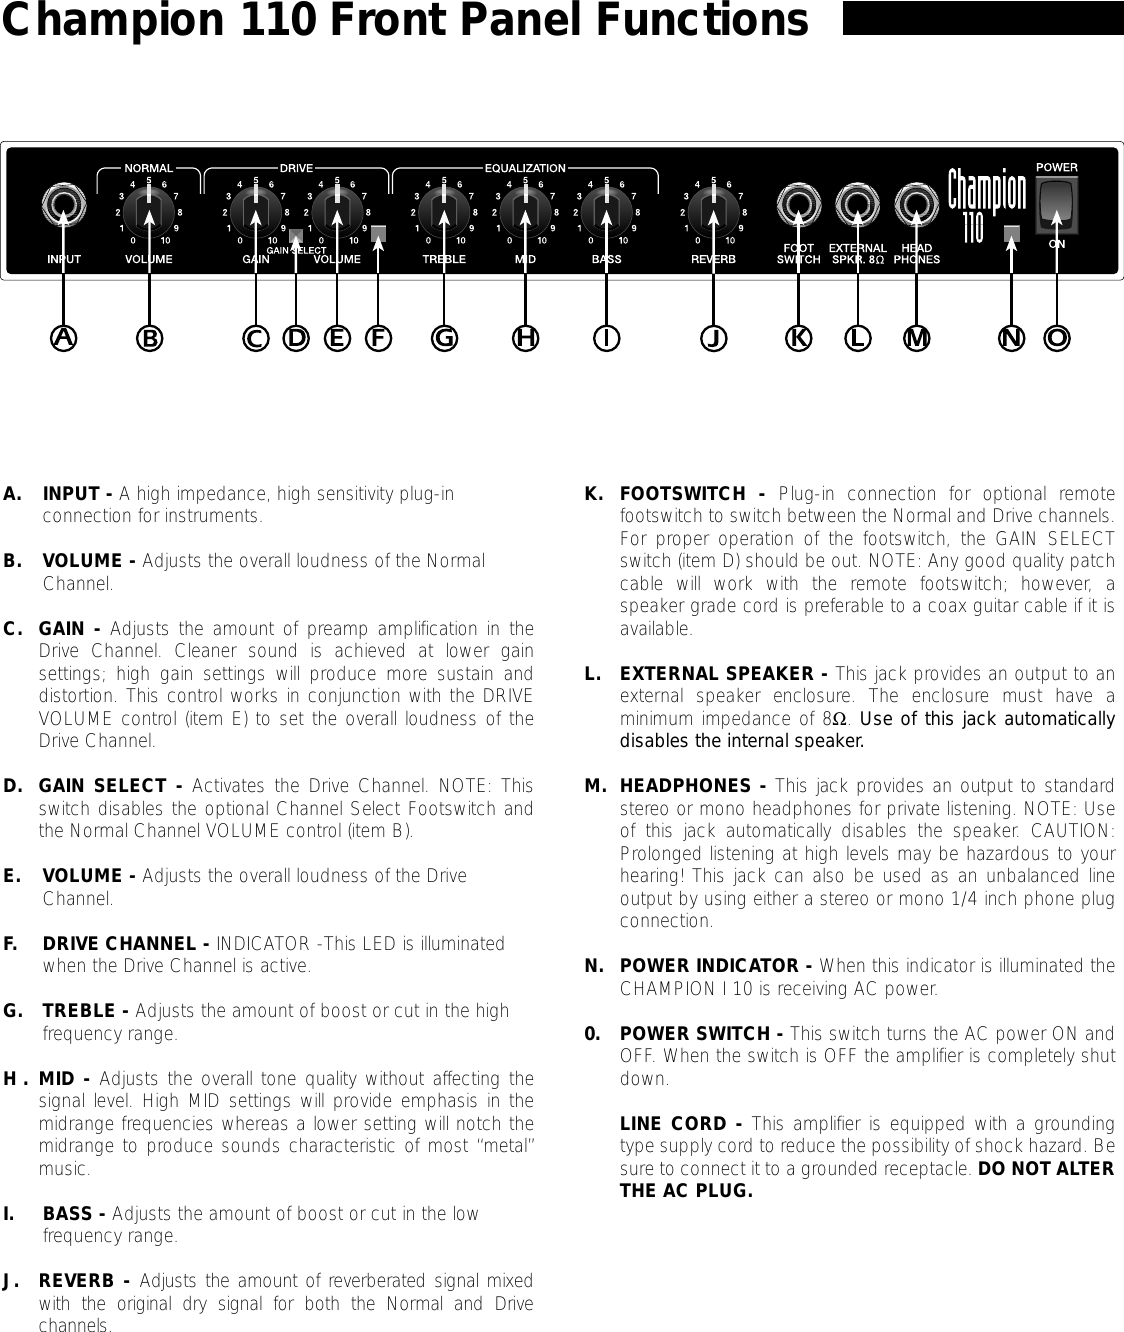 Page 3 of 4 - Fender  Champion 110 Manual